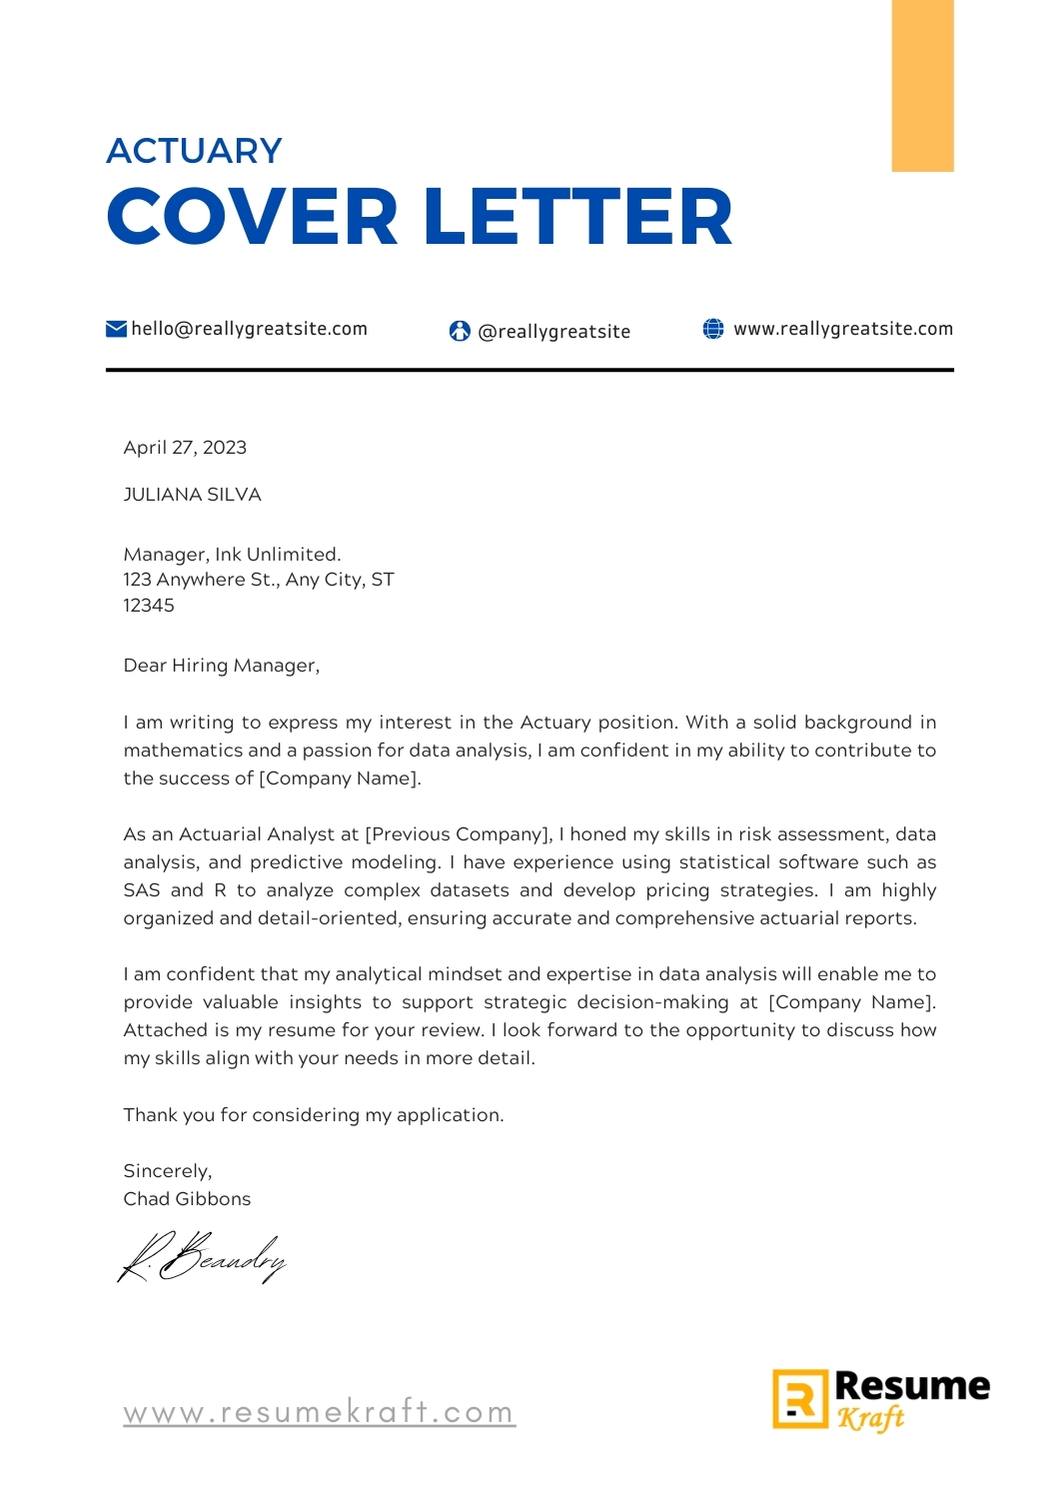 actuary cover letter no experience